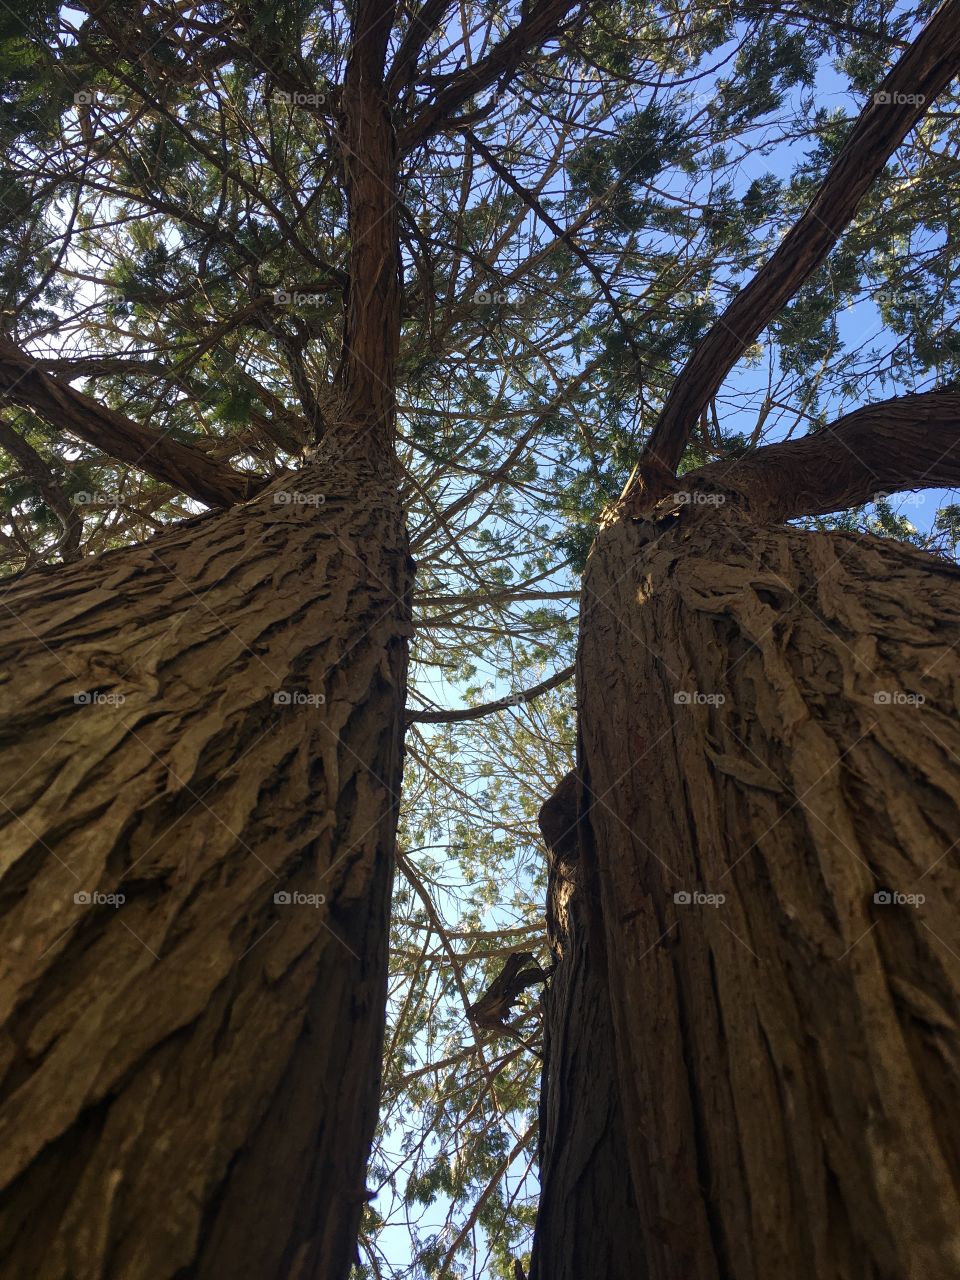 Bark view of two similar trees